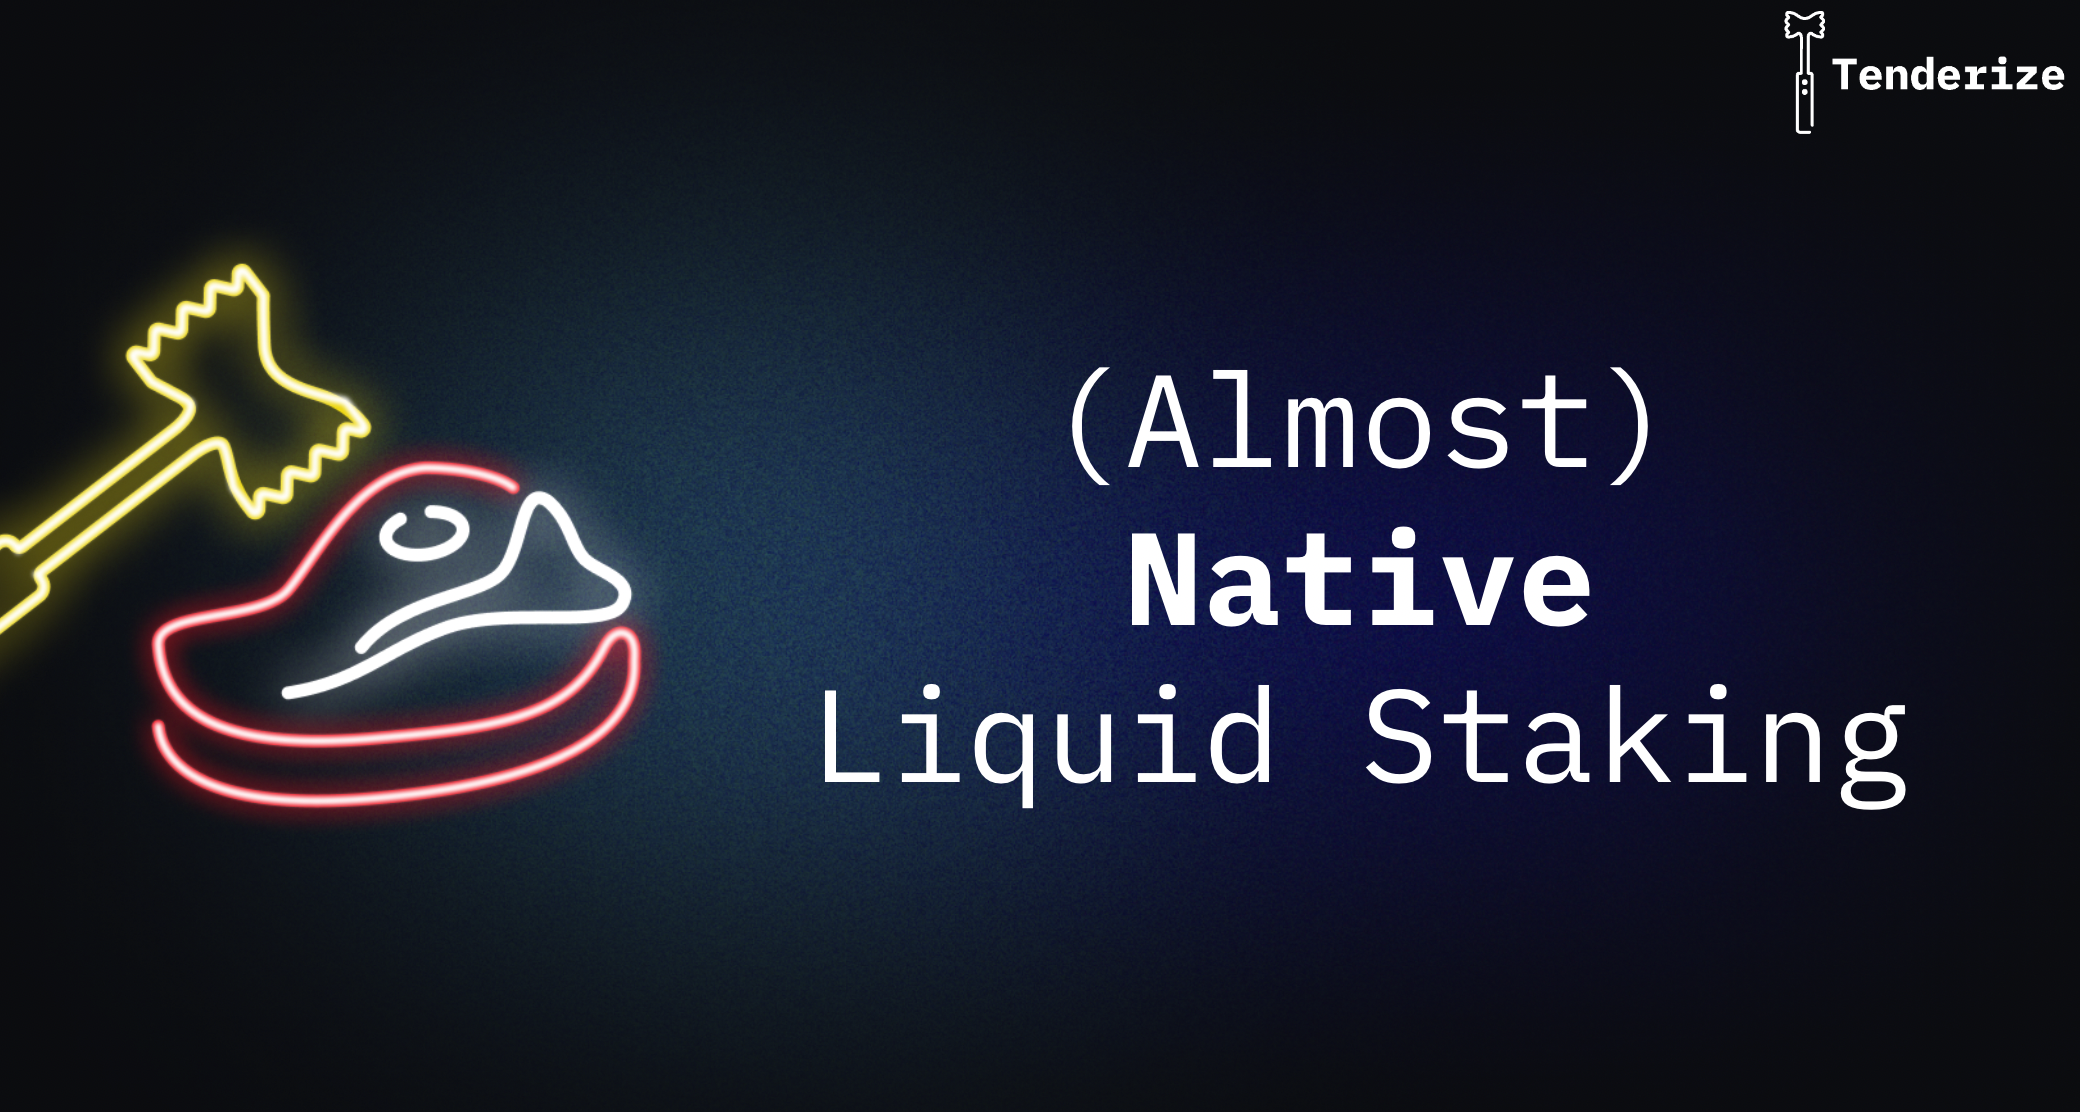 Introducing Tenderize V2: (Almost) Native Liquid Staking